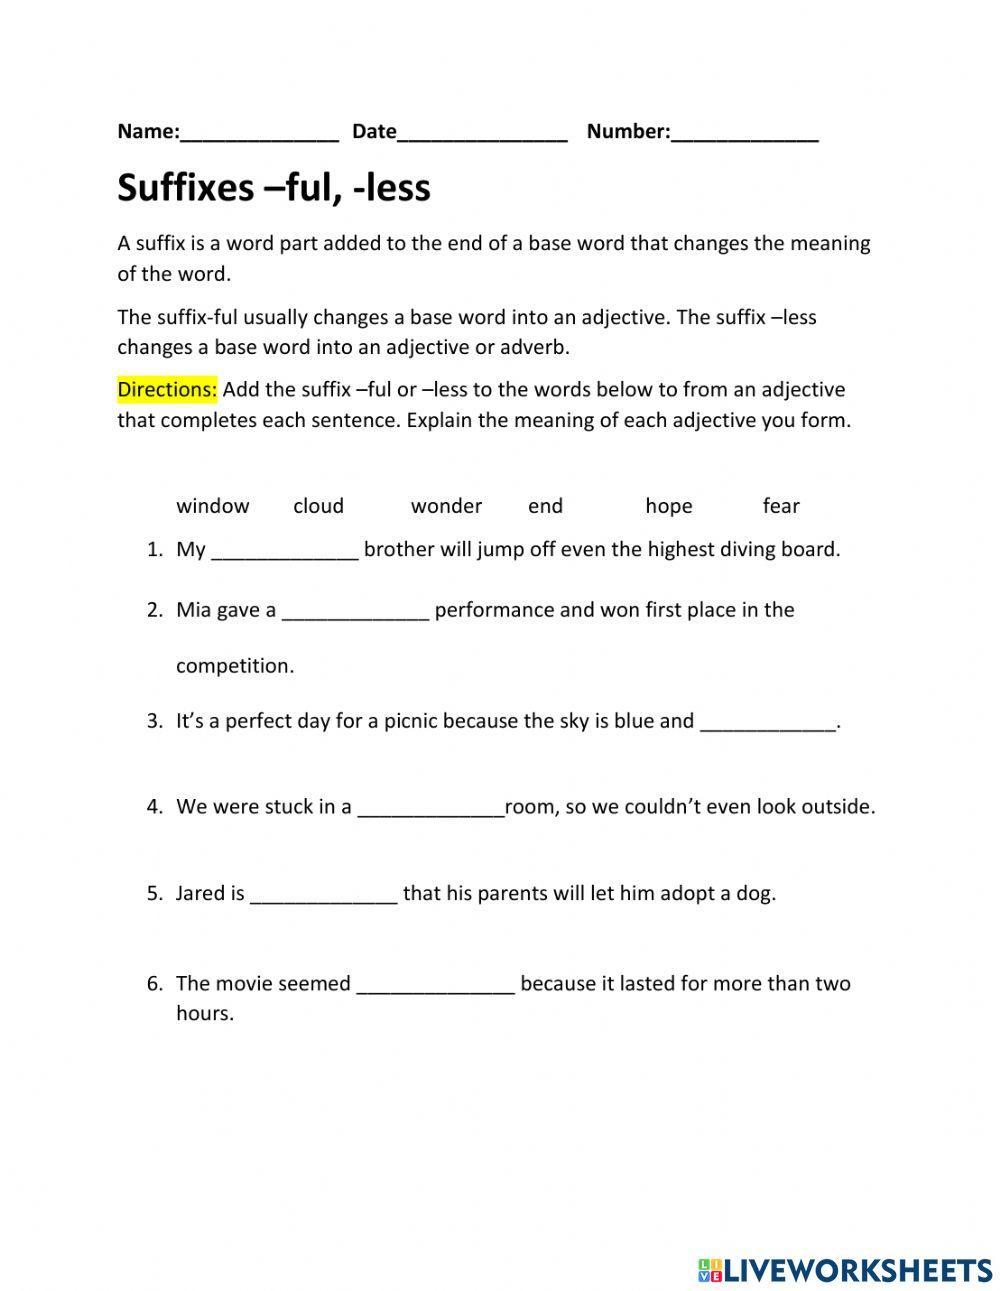 Suffixes ful and less